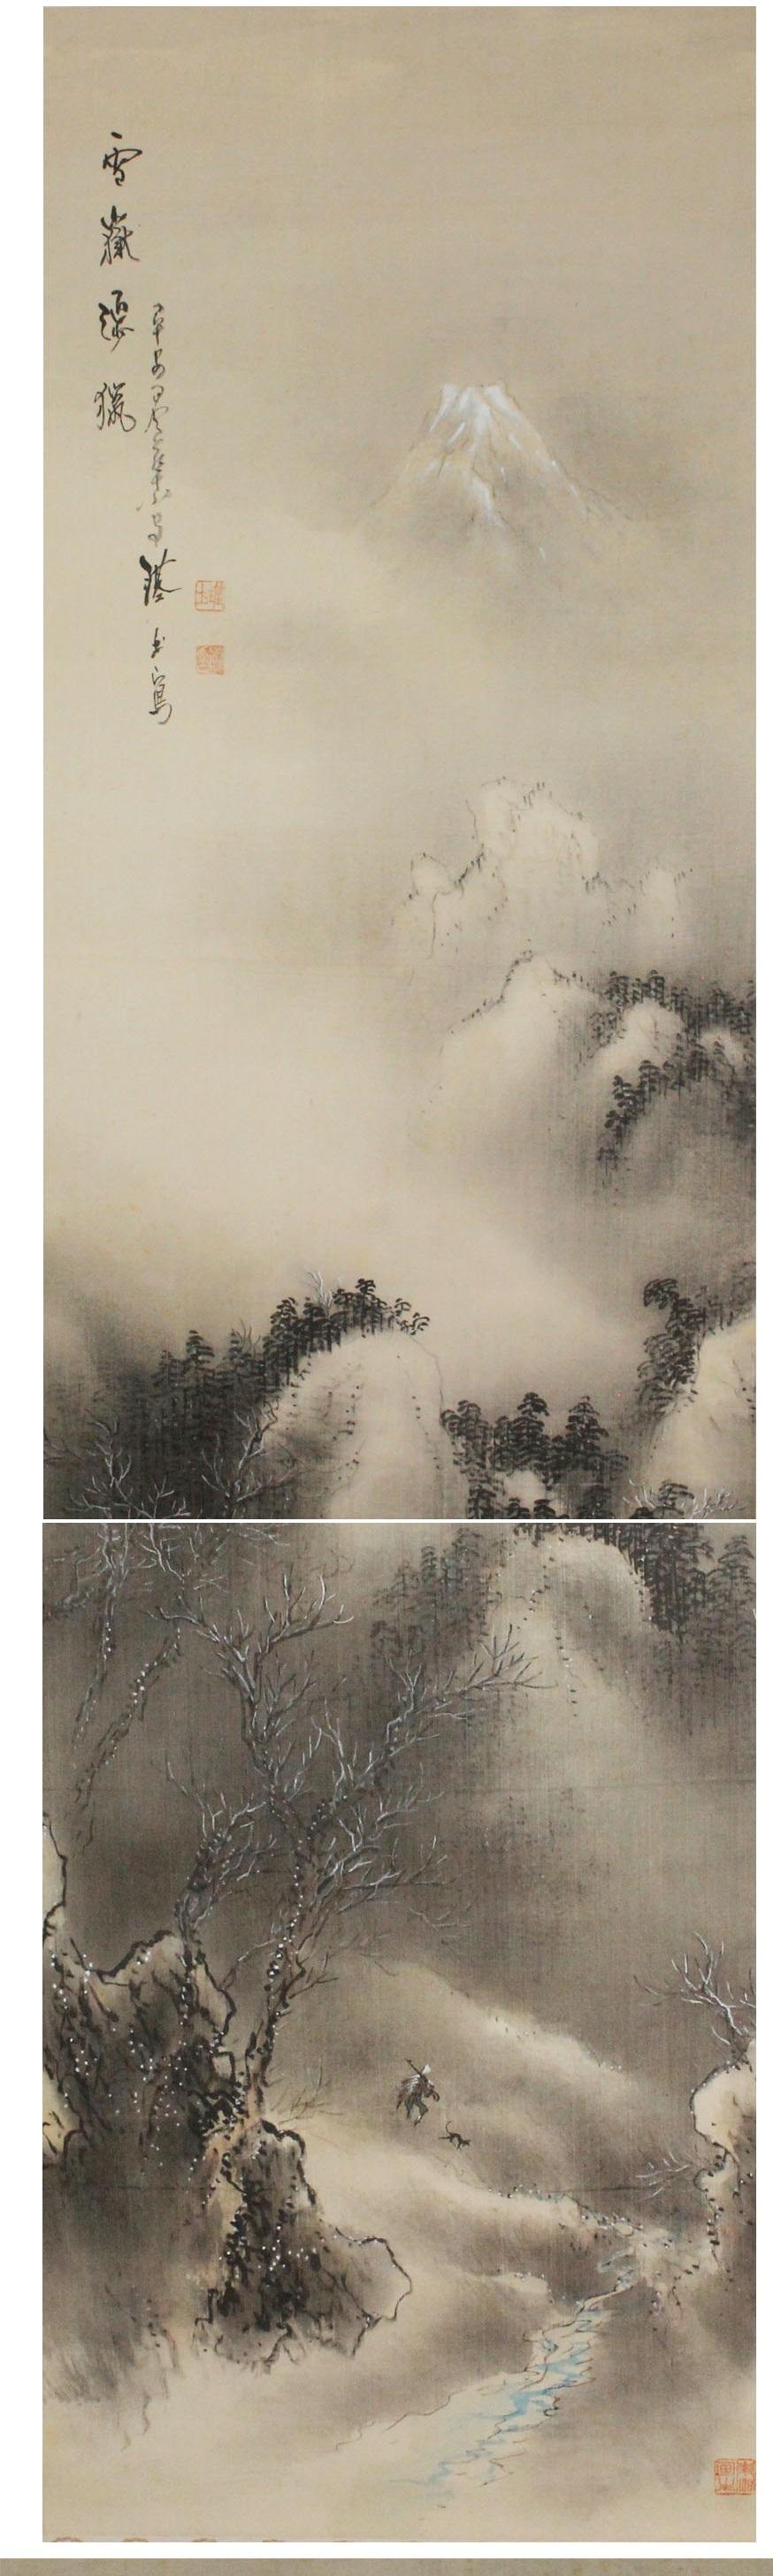 Silk Lovely Japanese 20th c Scroll by Naito Keto Nihonga Landscape Autumn For Sale